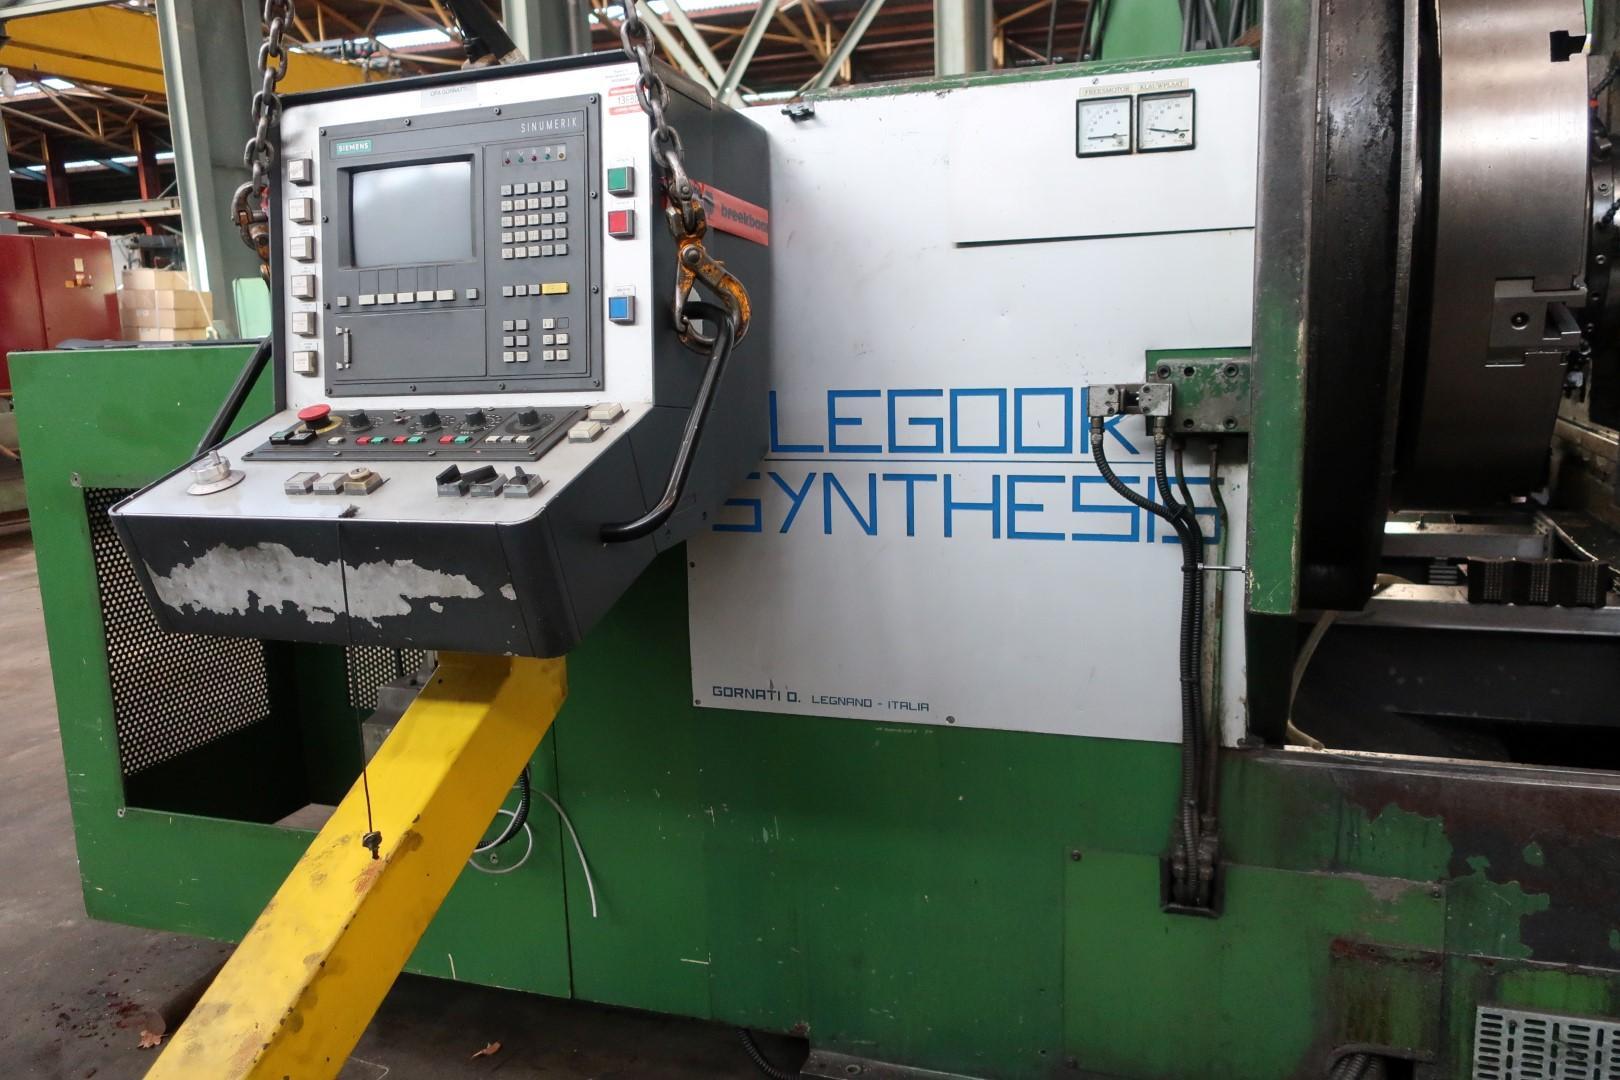 Lathes (CNC and Manual)/Legoor - Synthesis